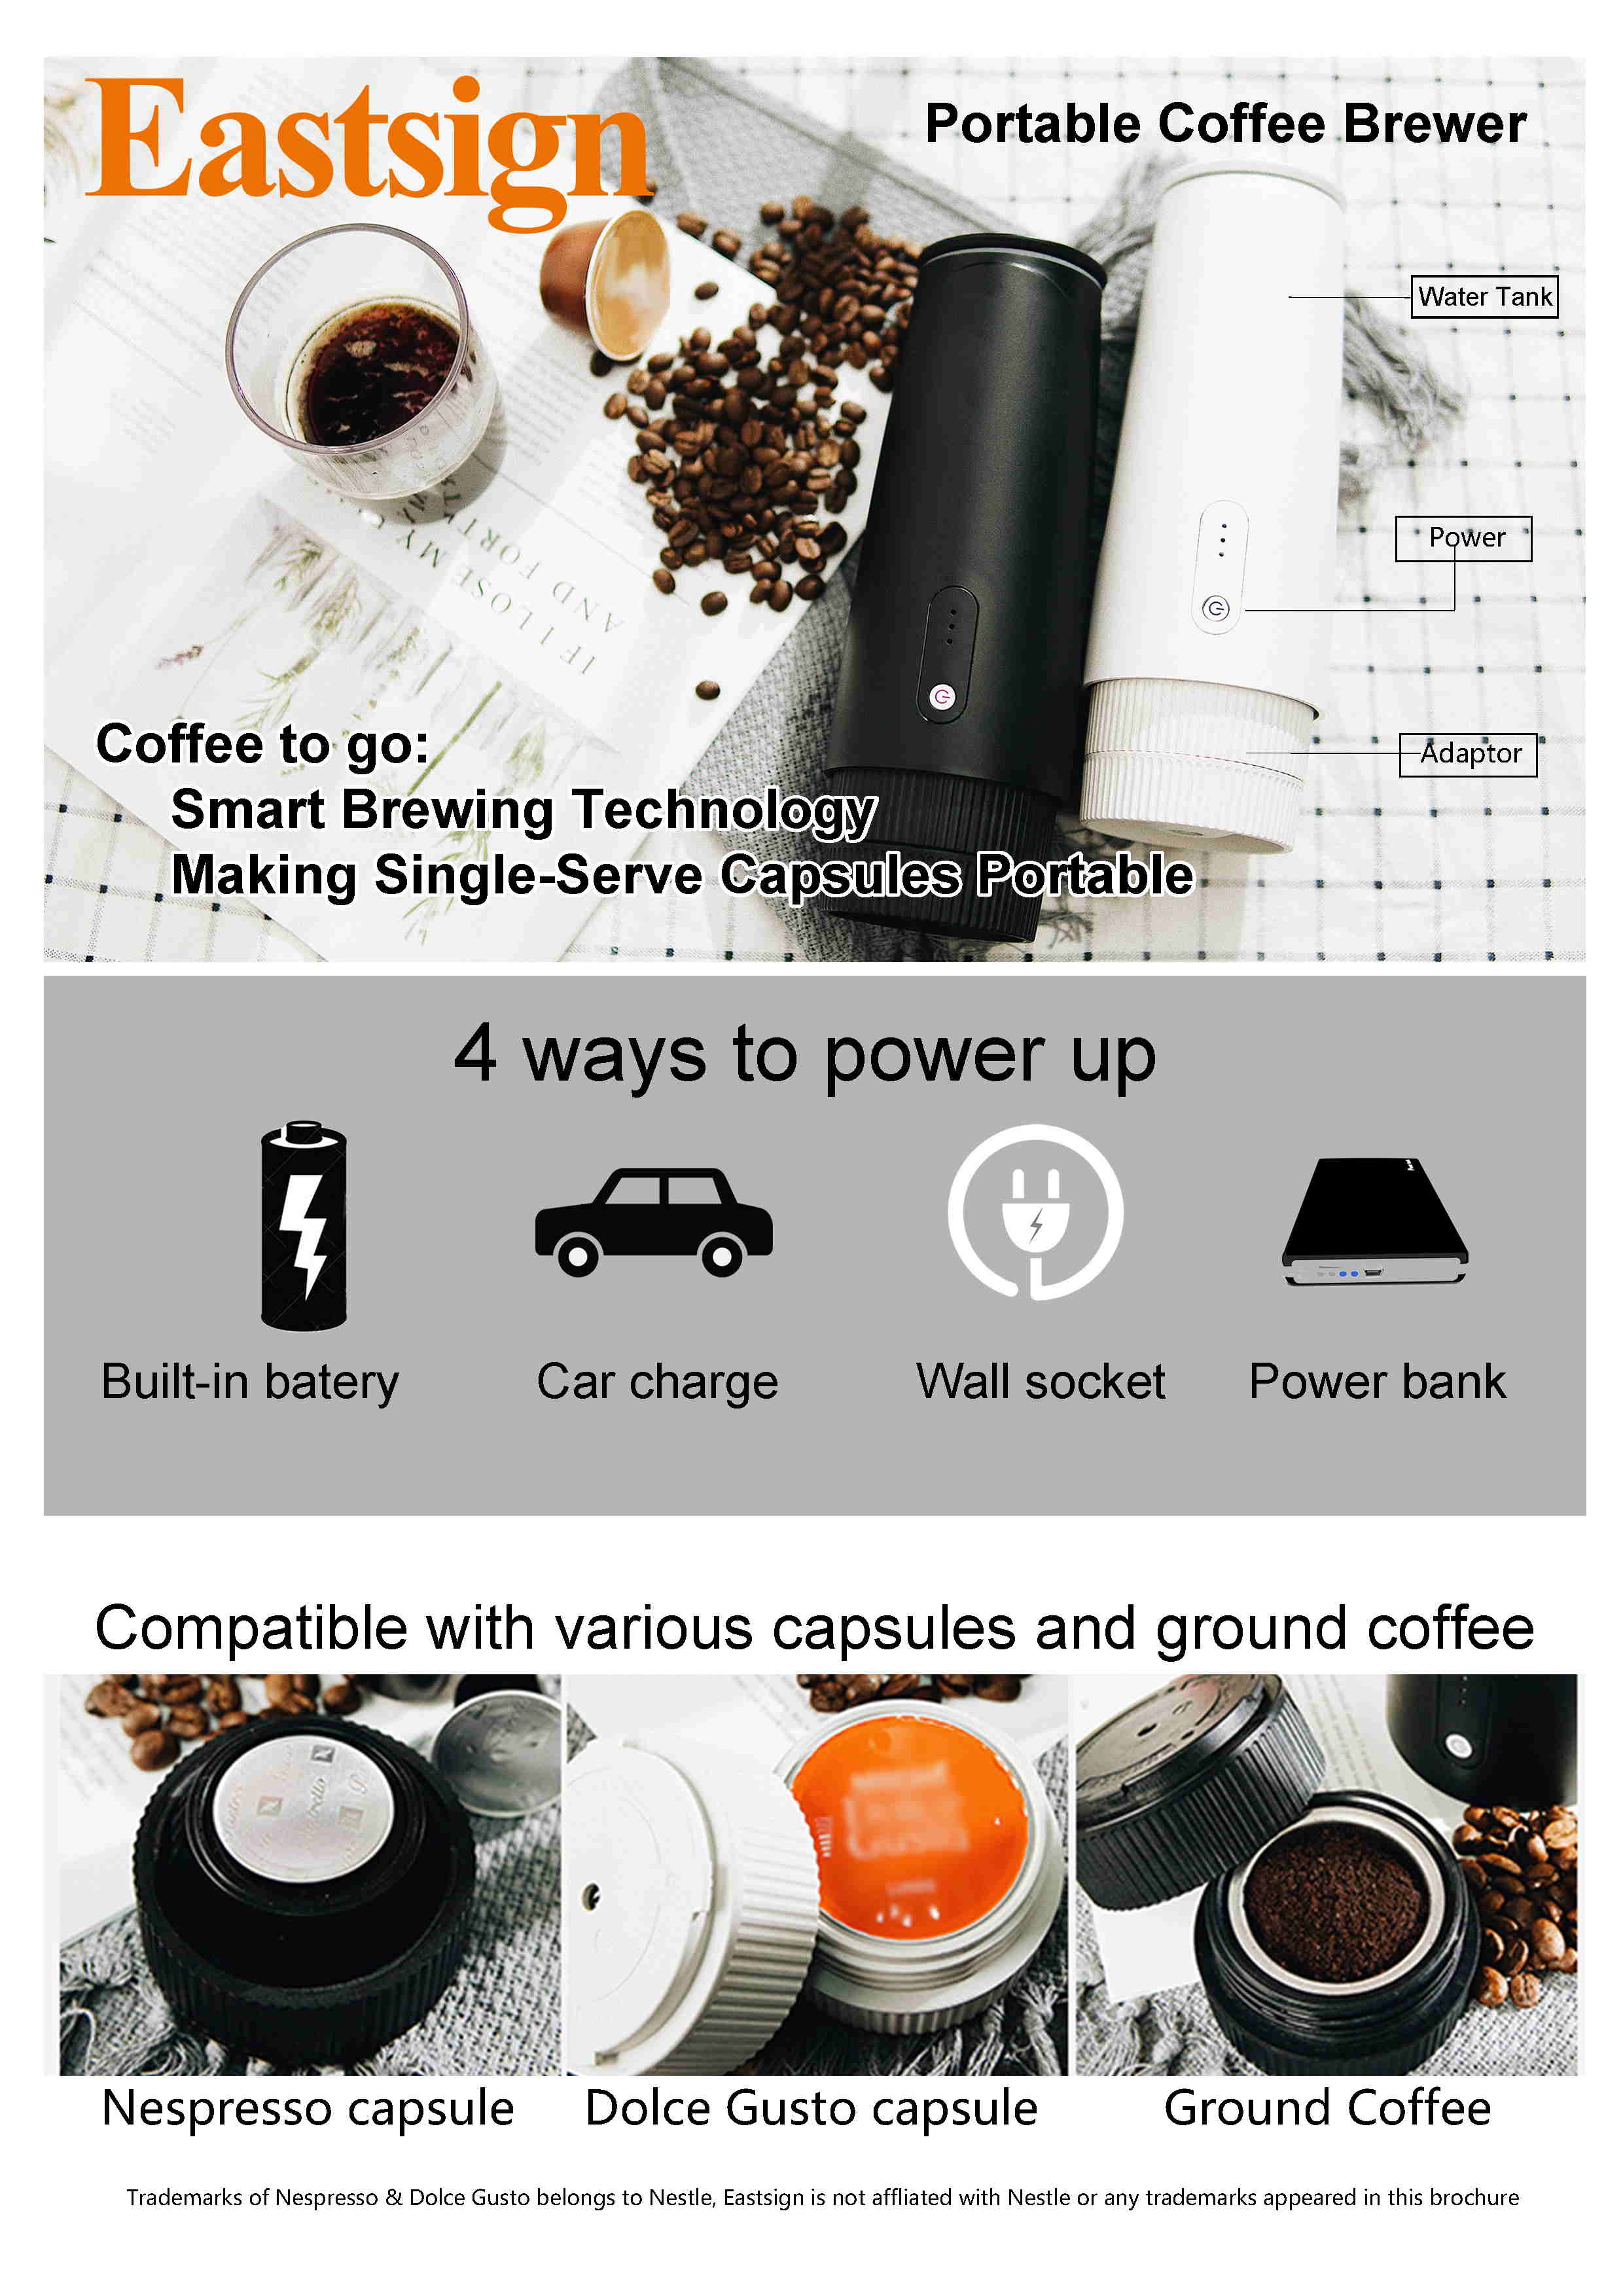 Portable Coffee Brewer (Heating and Battery)